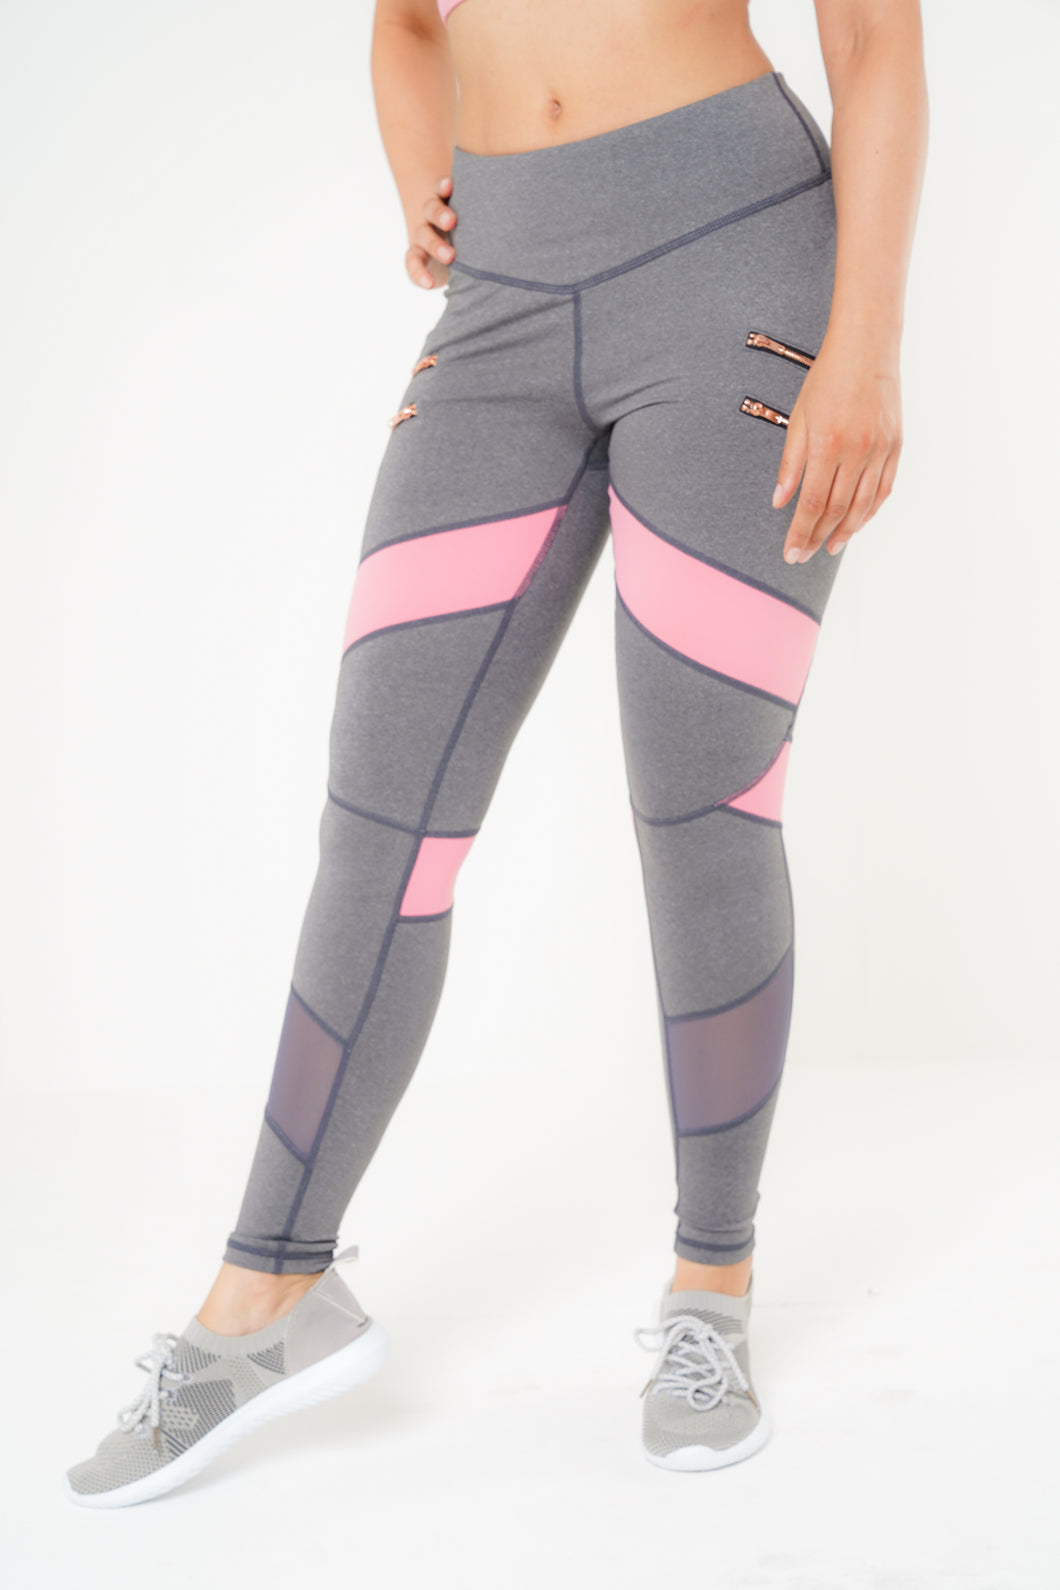 MLK Full Length Grey Leggings with Double Zip Detail and Pink Panel